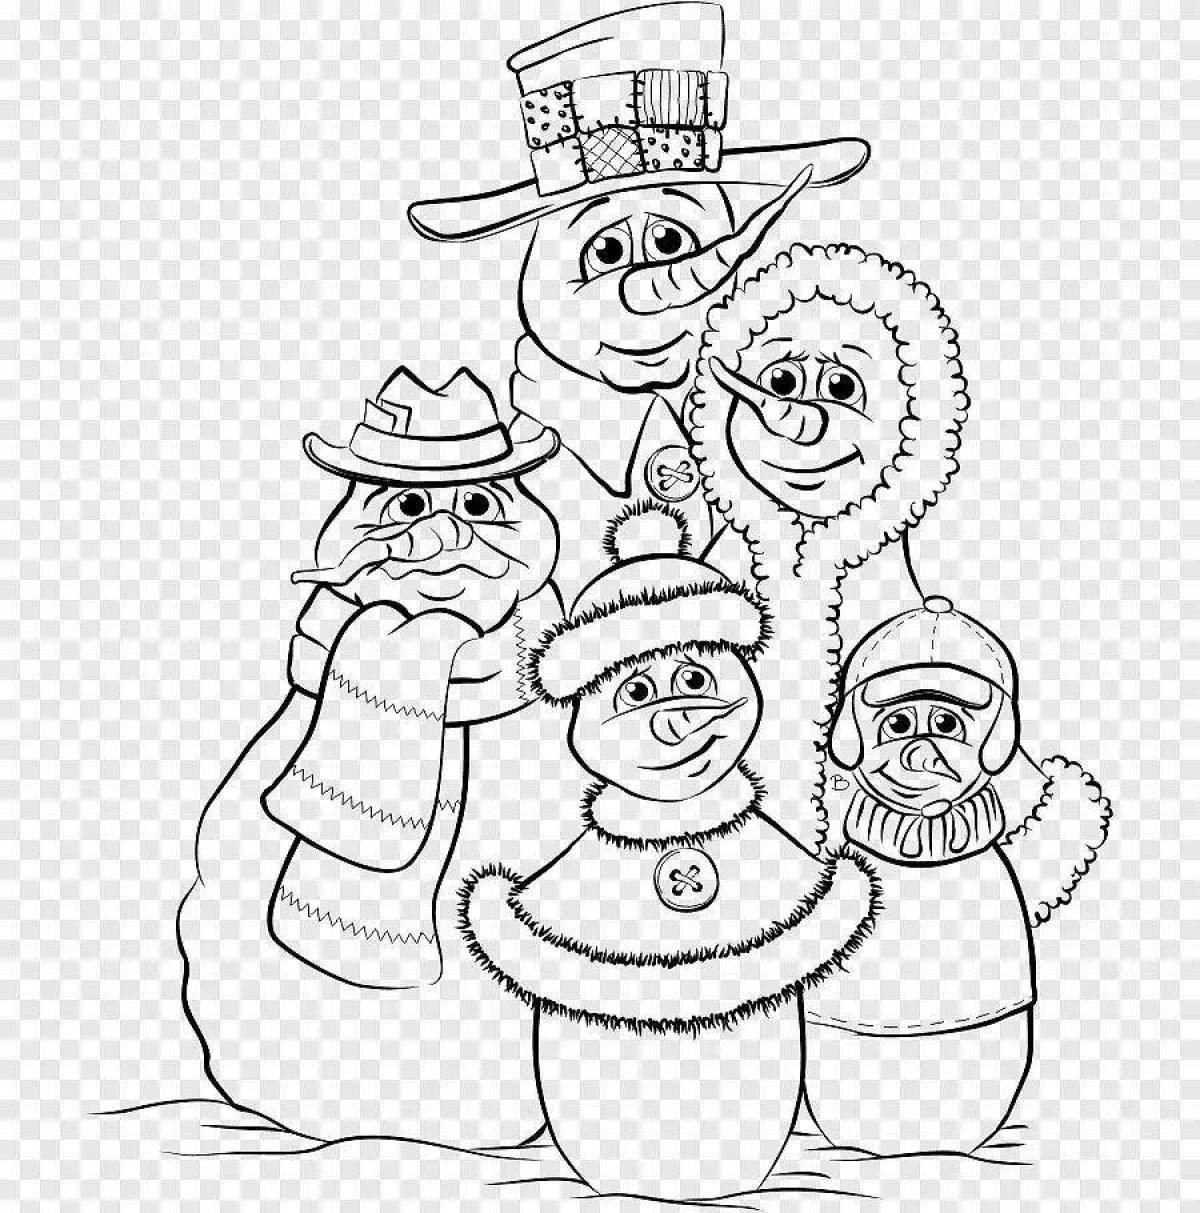 Coloring page adorable snowman family